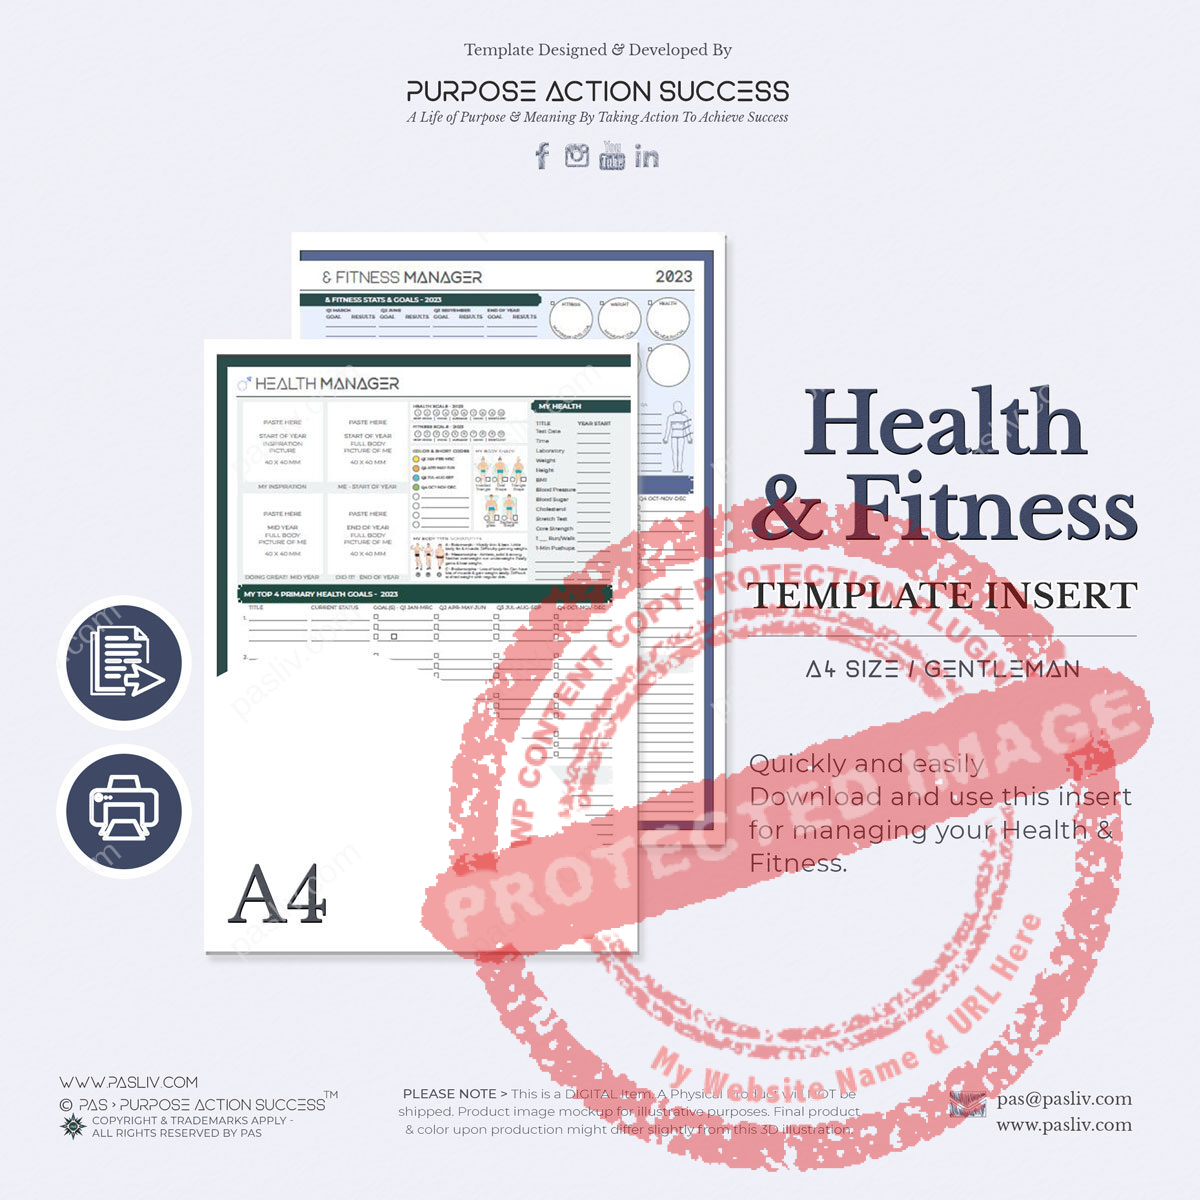 A4 PAS Health & Fitness Template for GENTS - Copyright & Trademarks By PAS > Purpose Action Success - All Rights Reserved